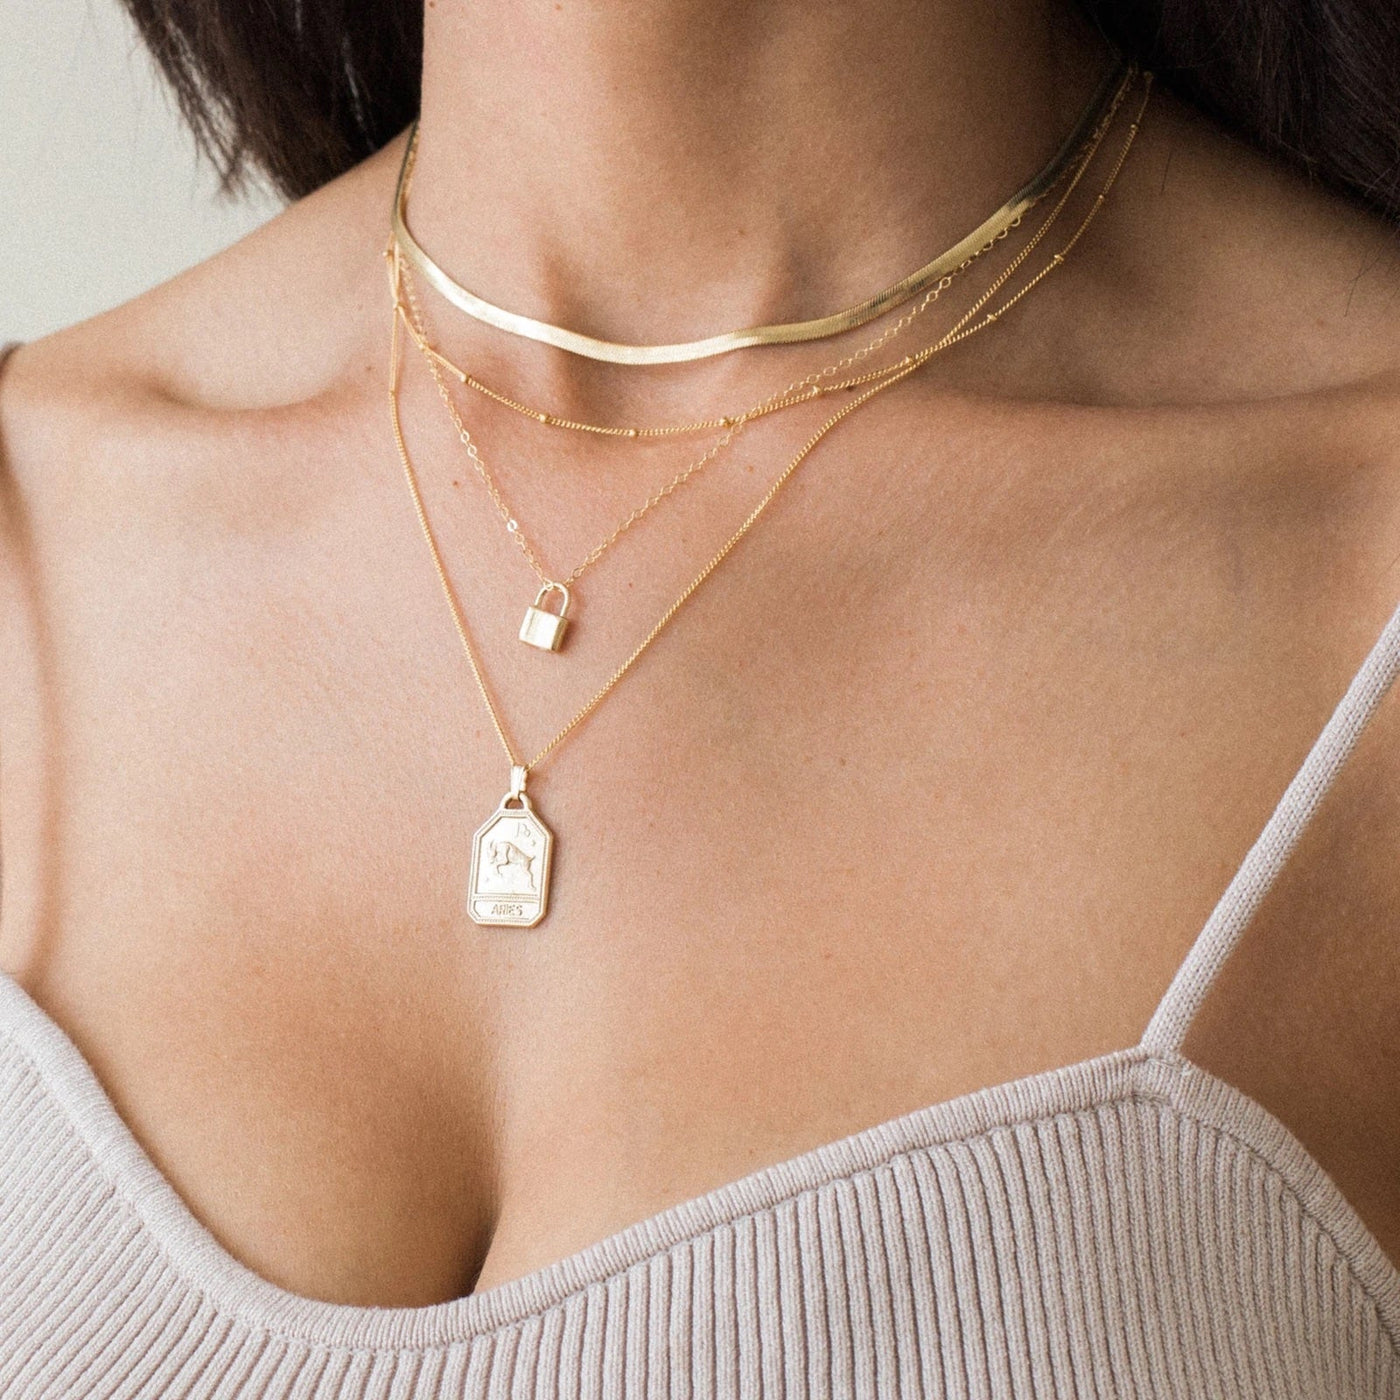 Herringbone Chain - Necklace with Initials for by Talisa - 18K gold  necklaces